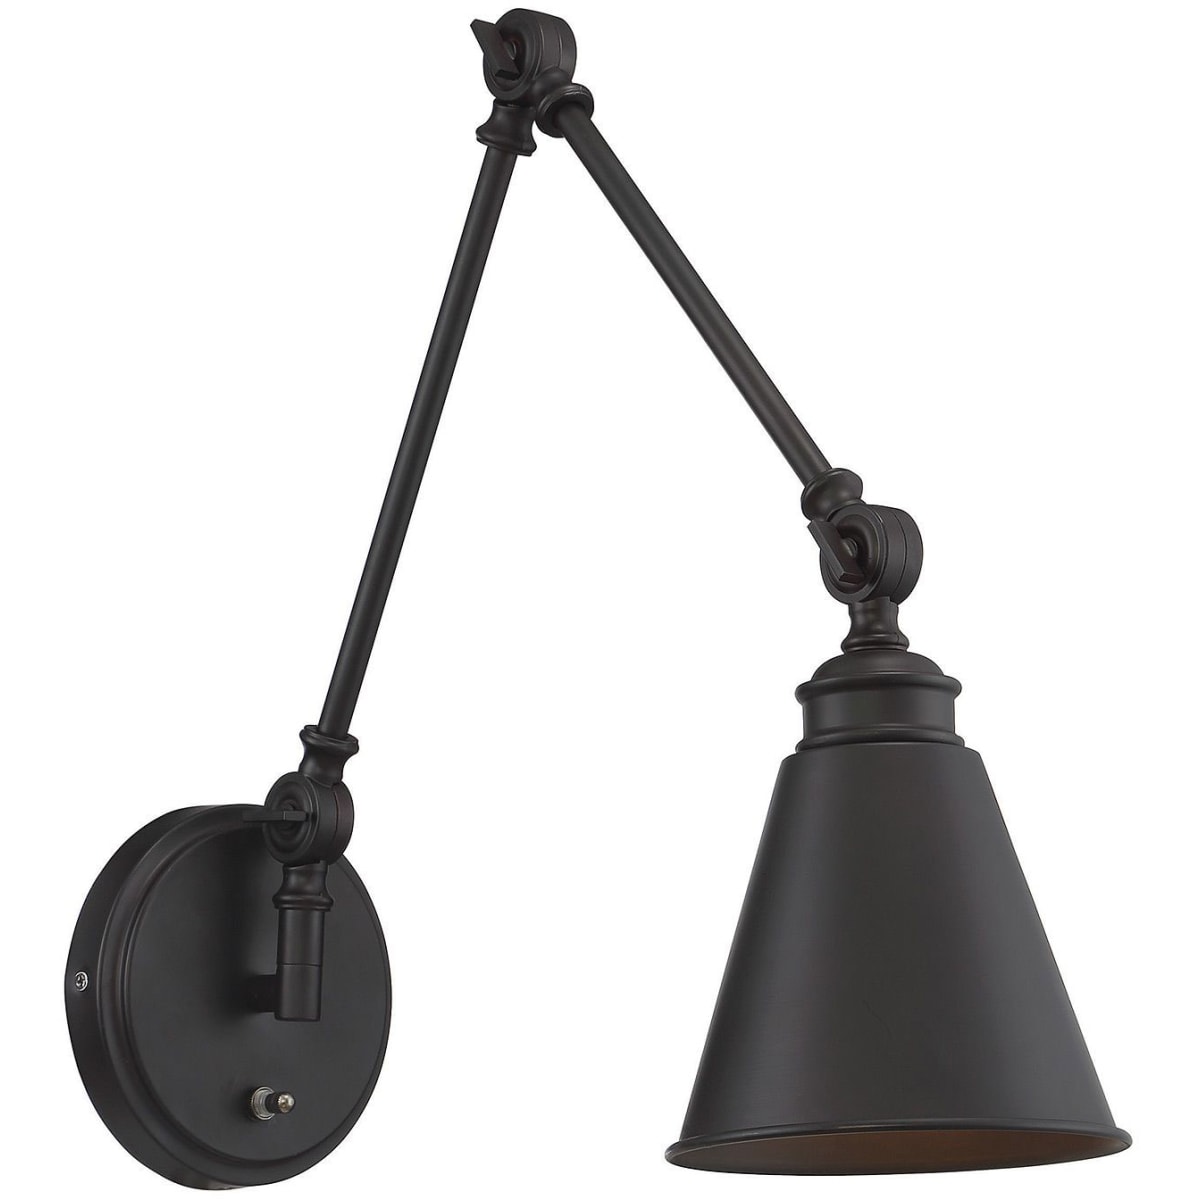 Savoy House Morland 1 Light Adjustable Sconce With Plug in English Bronze for sale online 